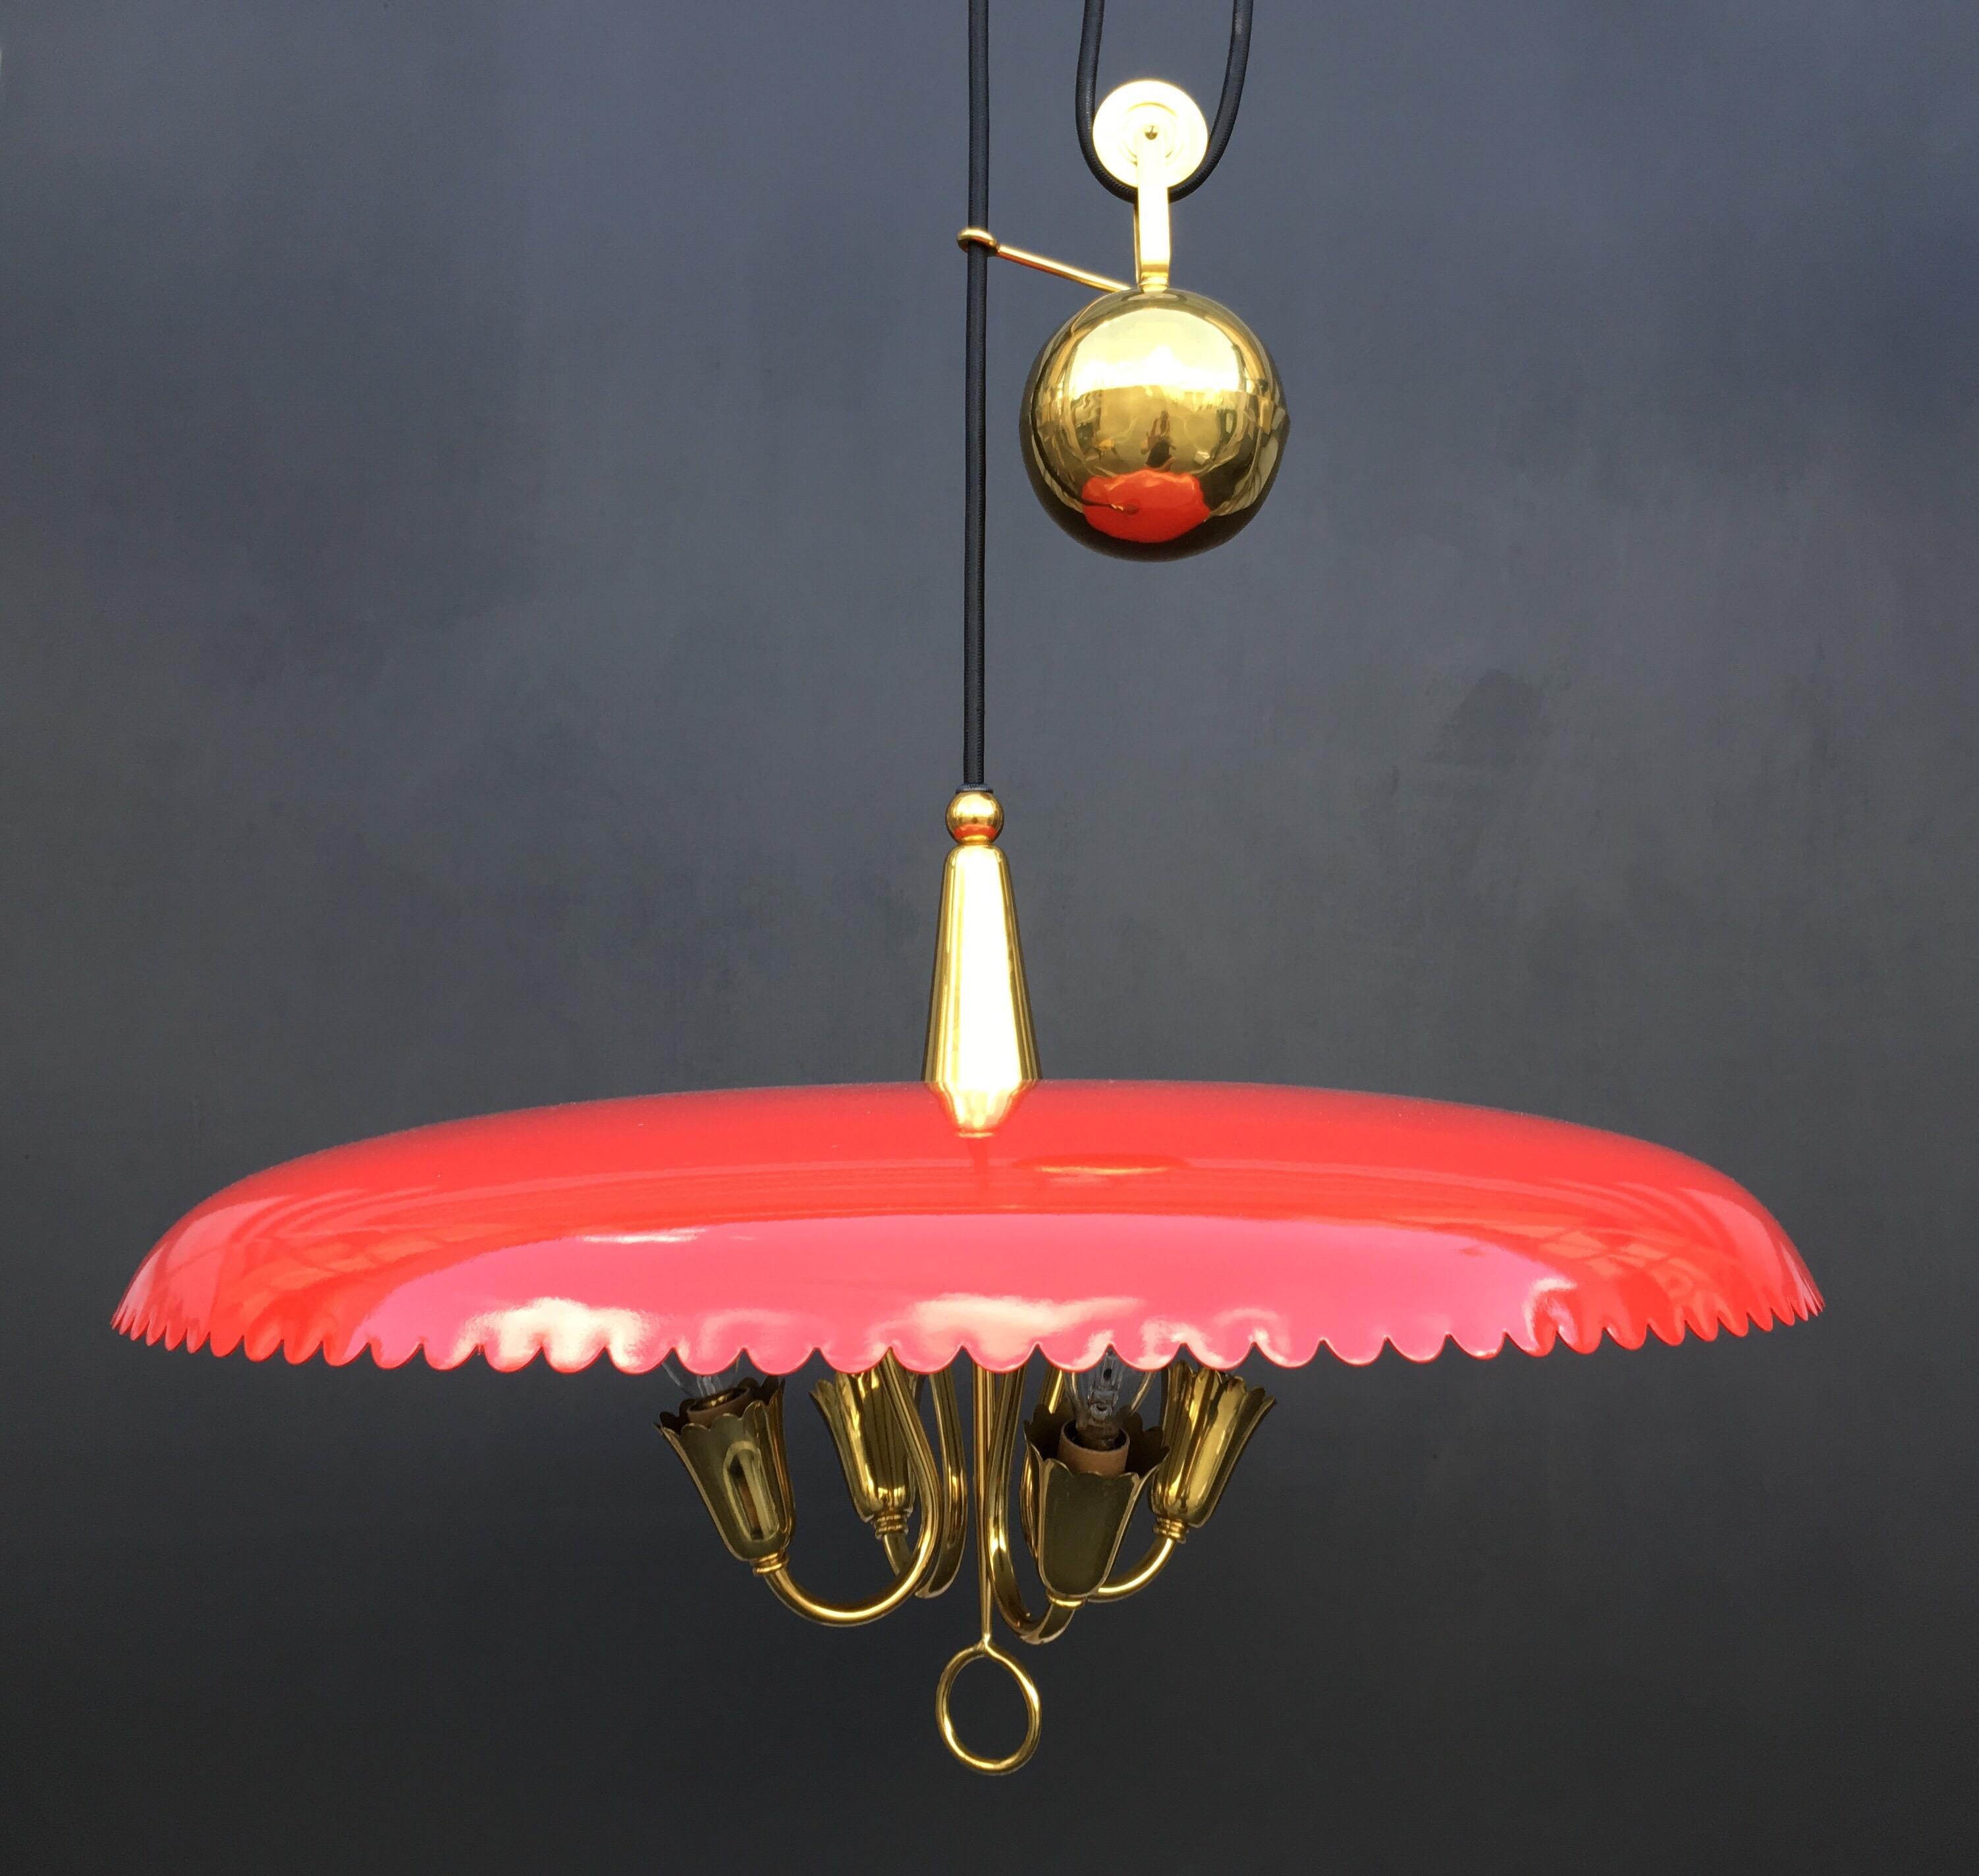 Metal Italian Counter Weight Chandelier Lamp Pendant, Brass and Red Lacquer, 1950s